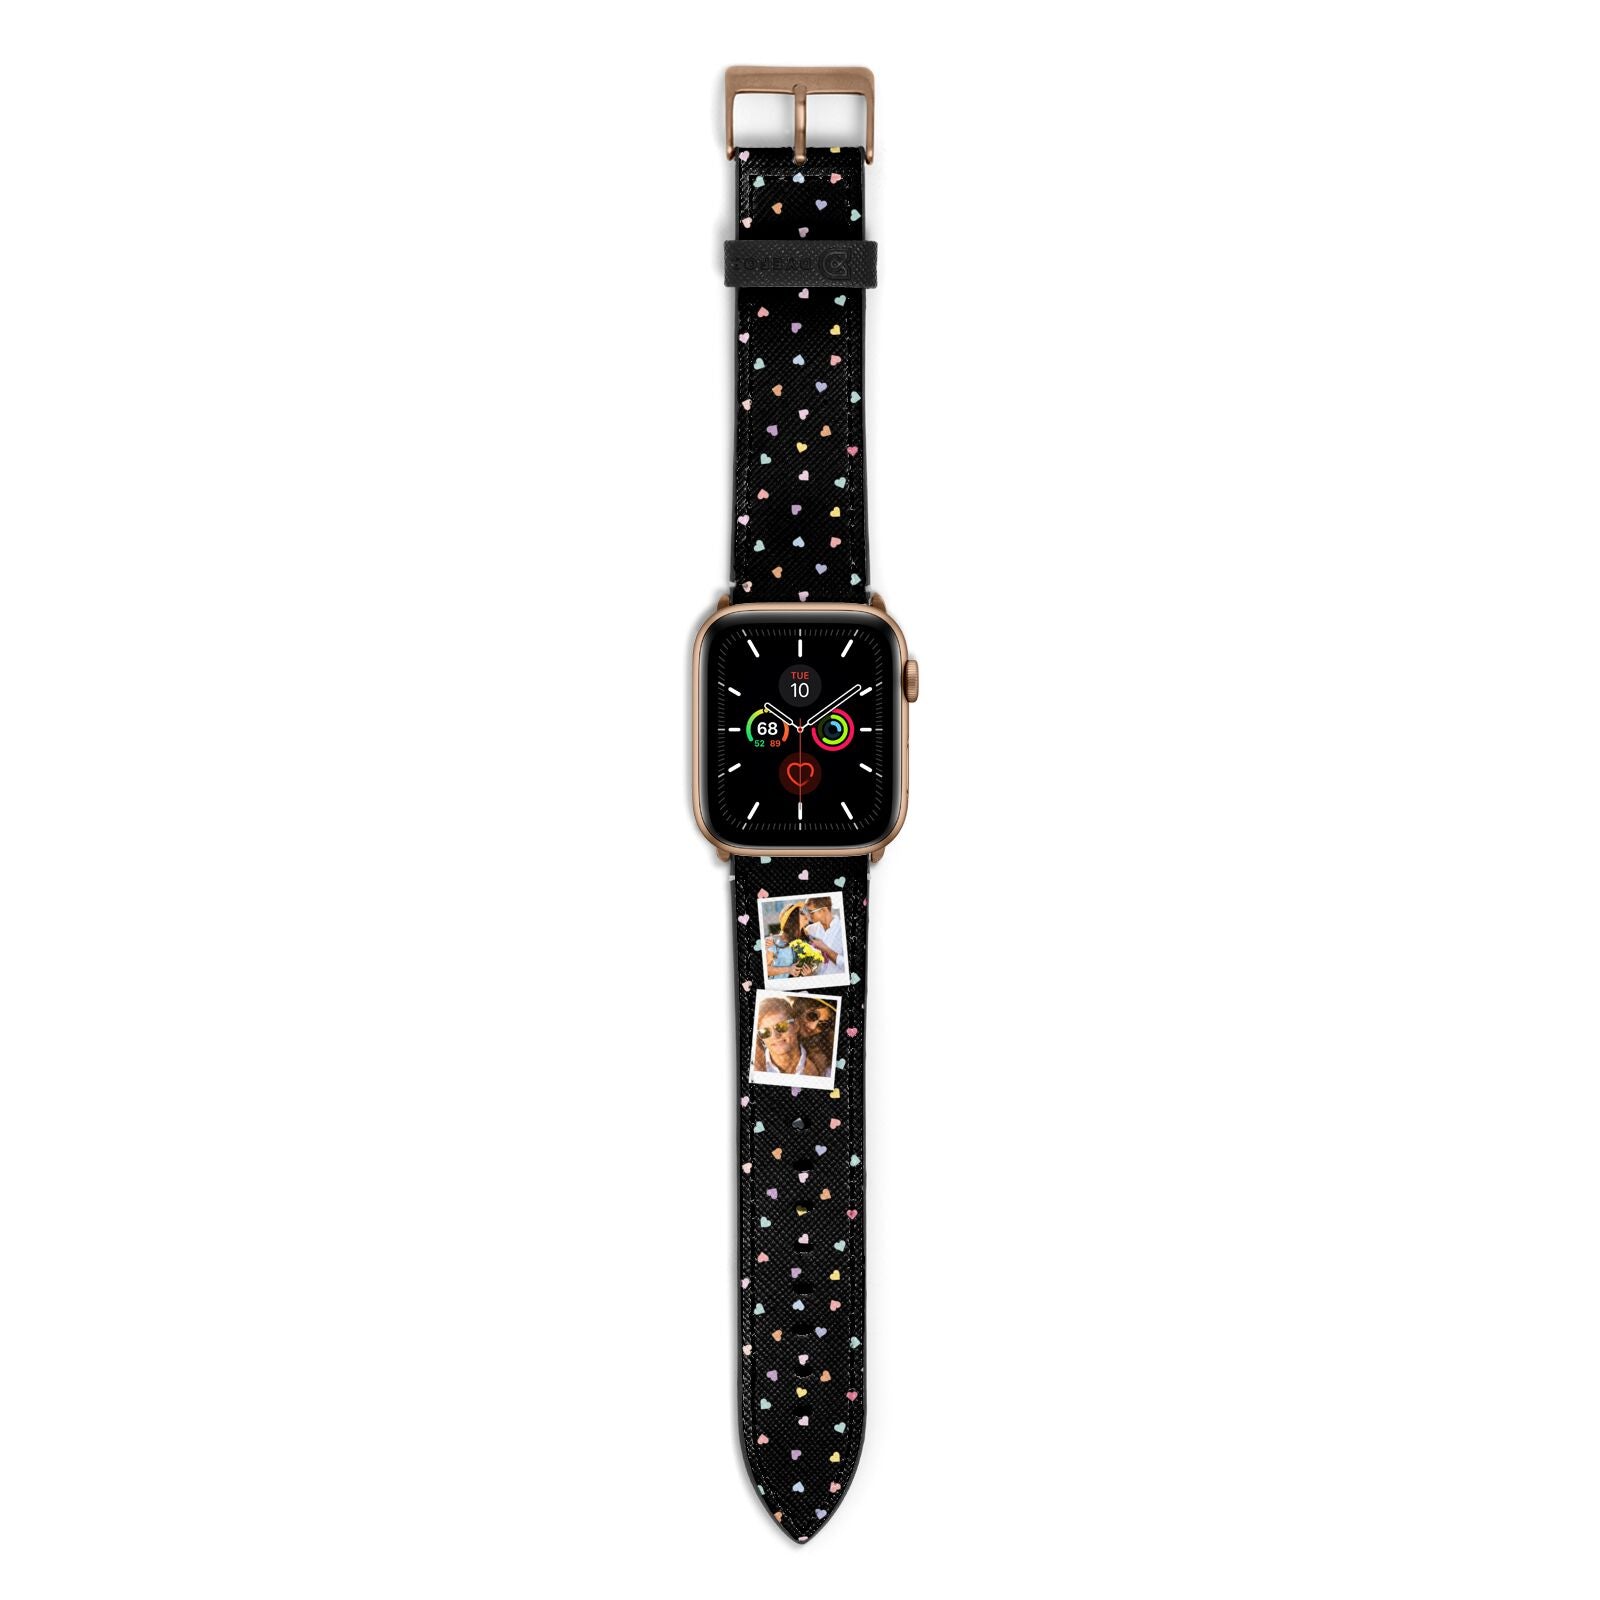 Confetti Heart Photo Apple Watch Strap with Gold Hardware